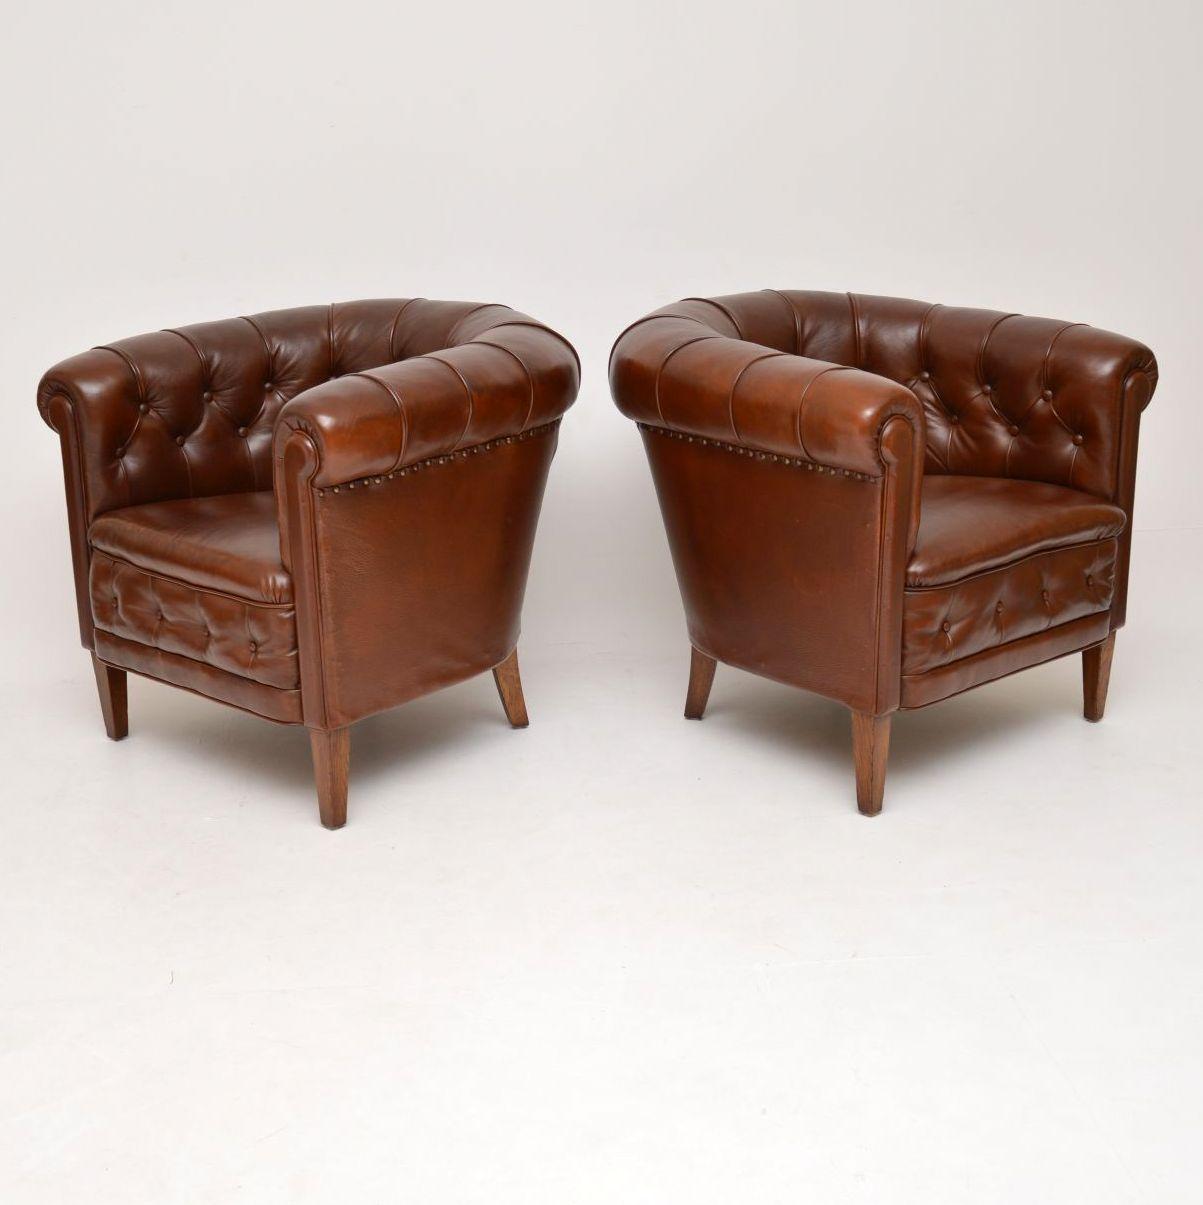 Pair of Antique Swedish Leather Armchairs (Edwardian)